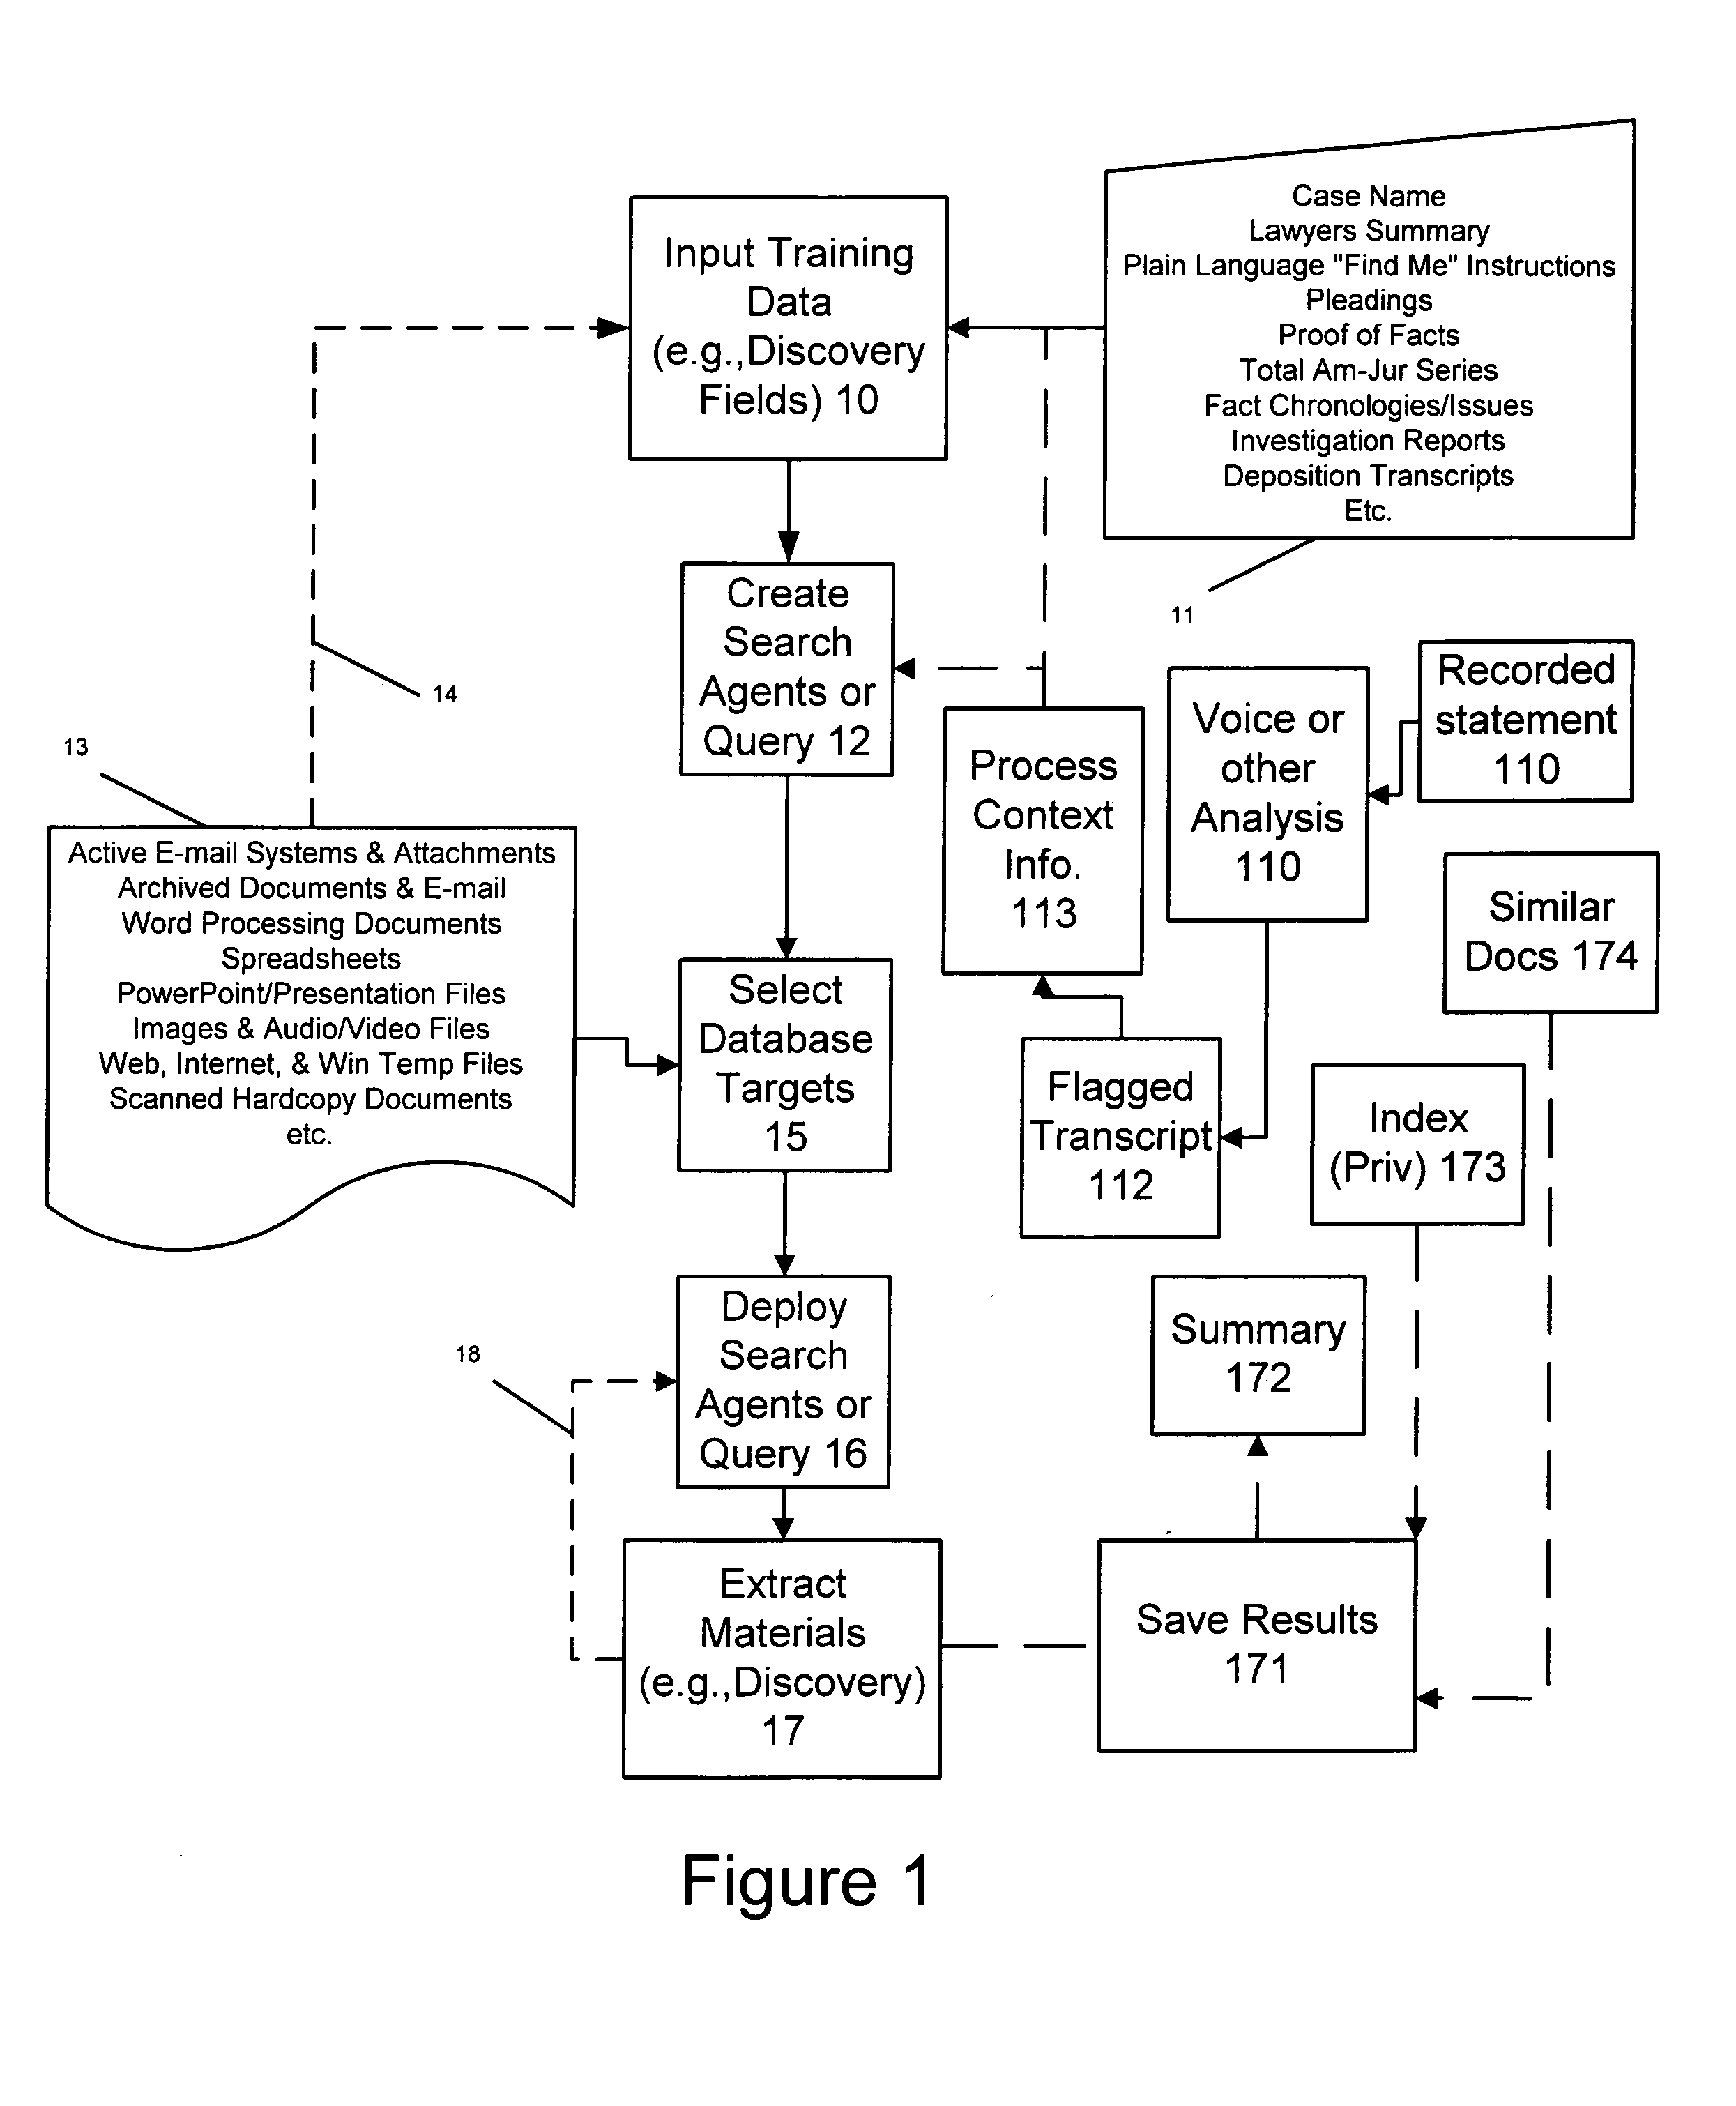 Method and system for providing electronic discovery on computer databases and archives using statement analysis to detect false statements and recover relevant data